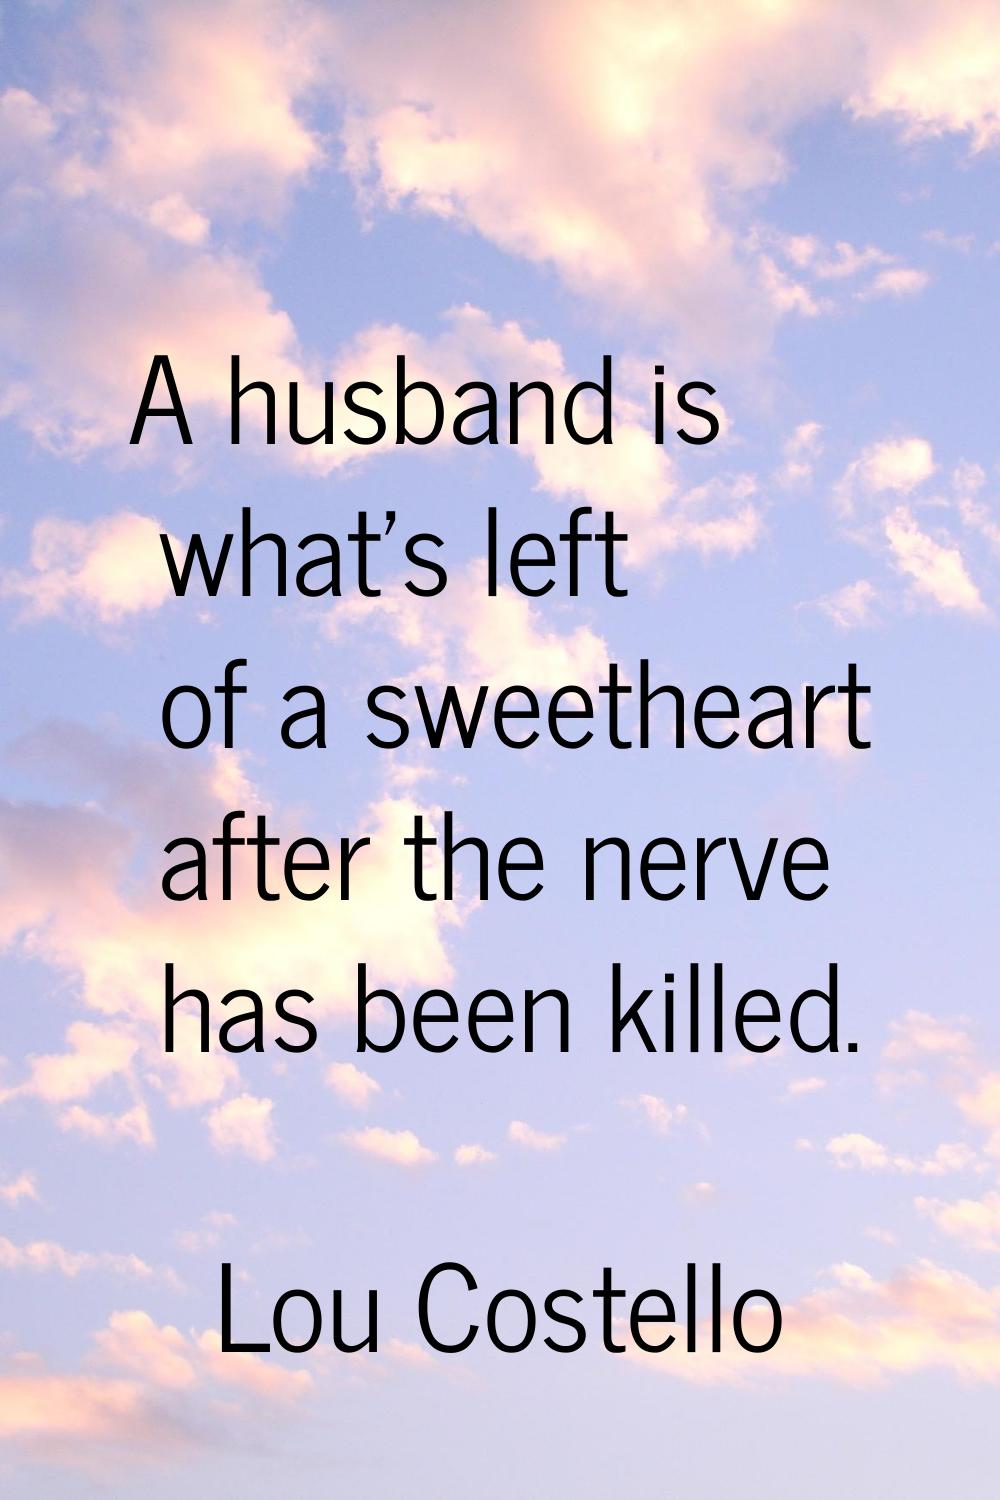 A husband is what's left of a sweetheart after the nerve has been killed.